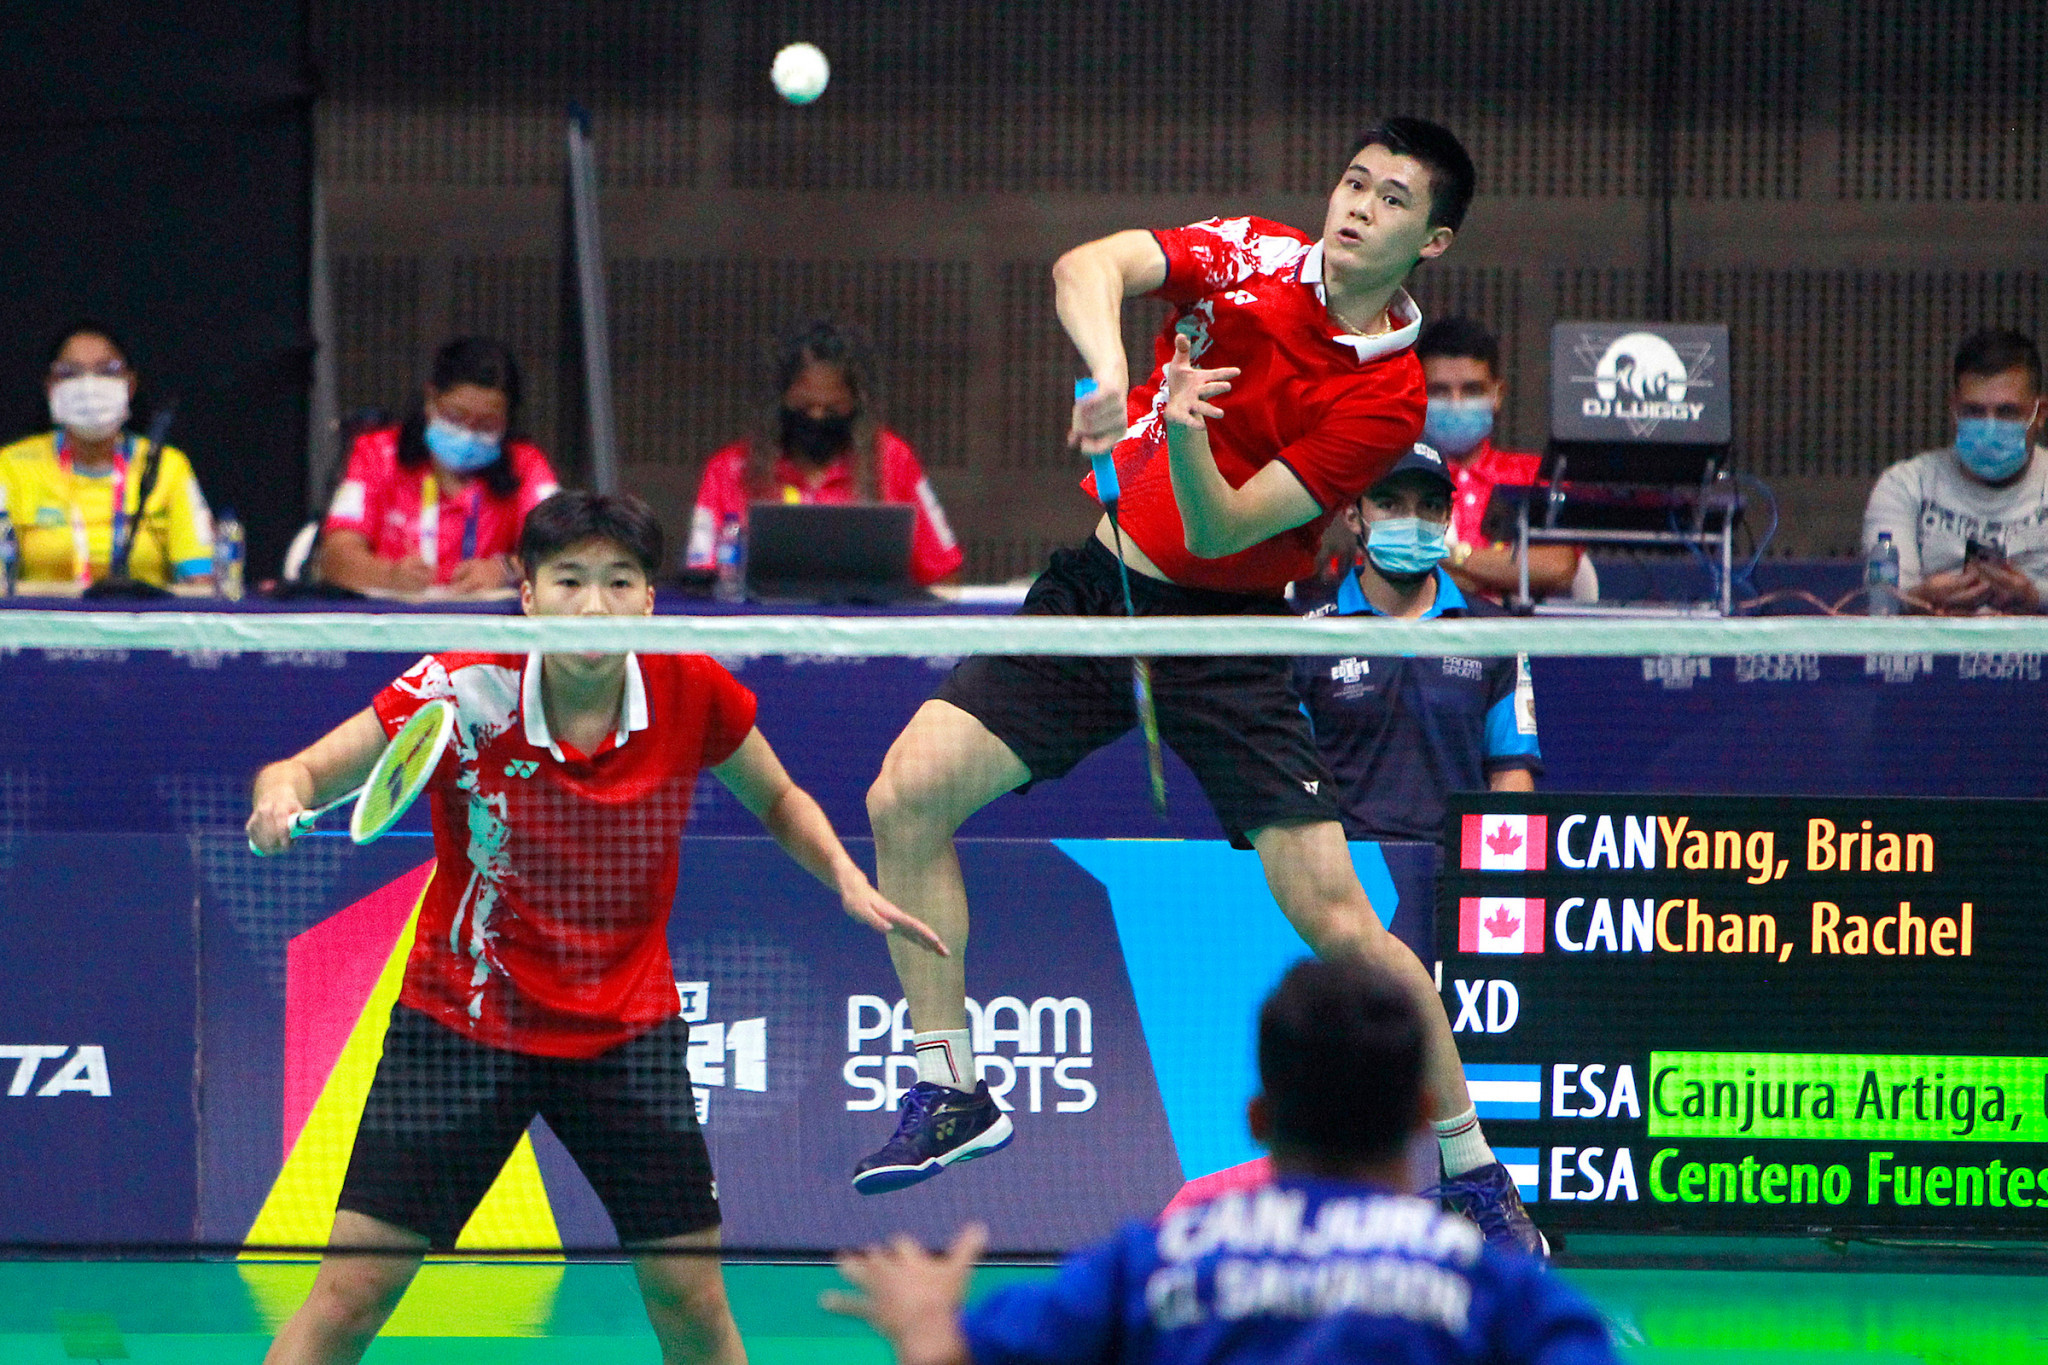 Canada claim historic hat-trick in day of badminton finals at Cali 2021 